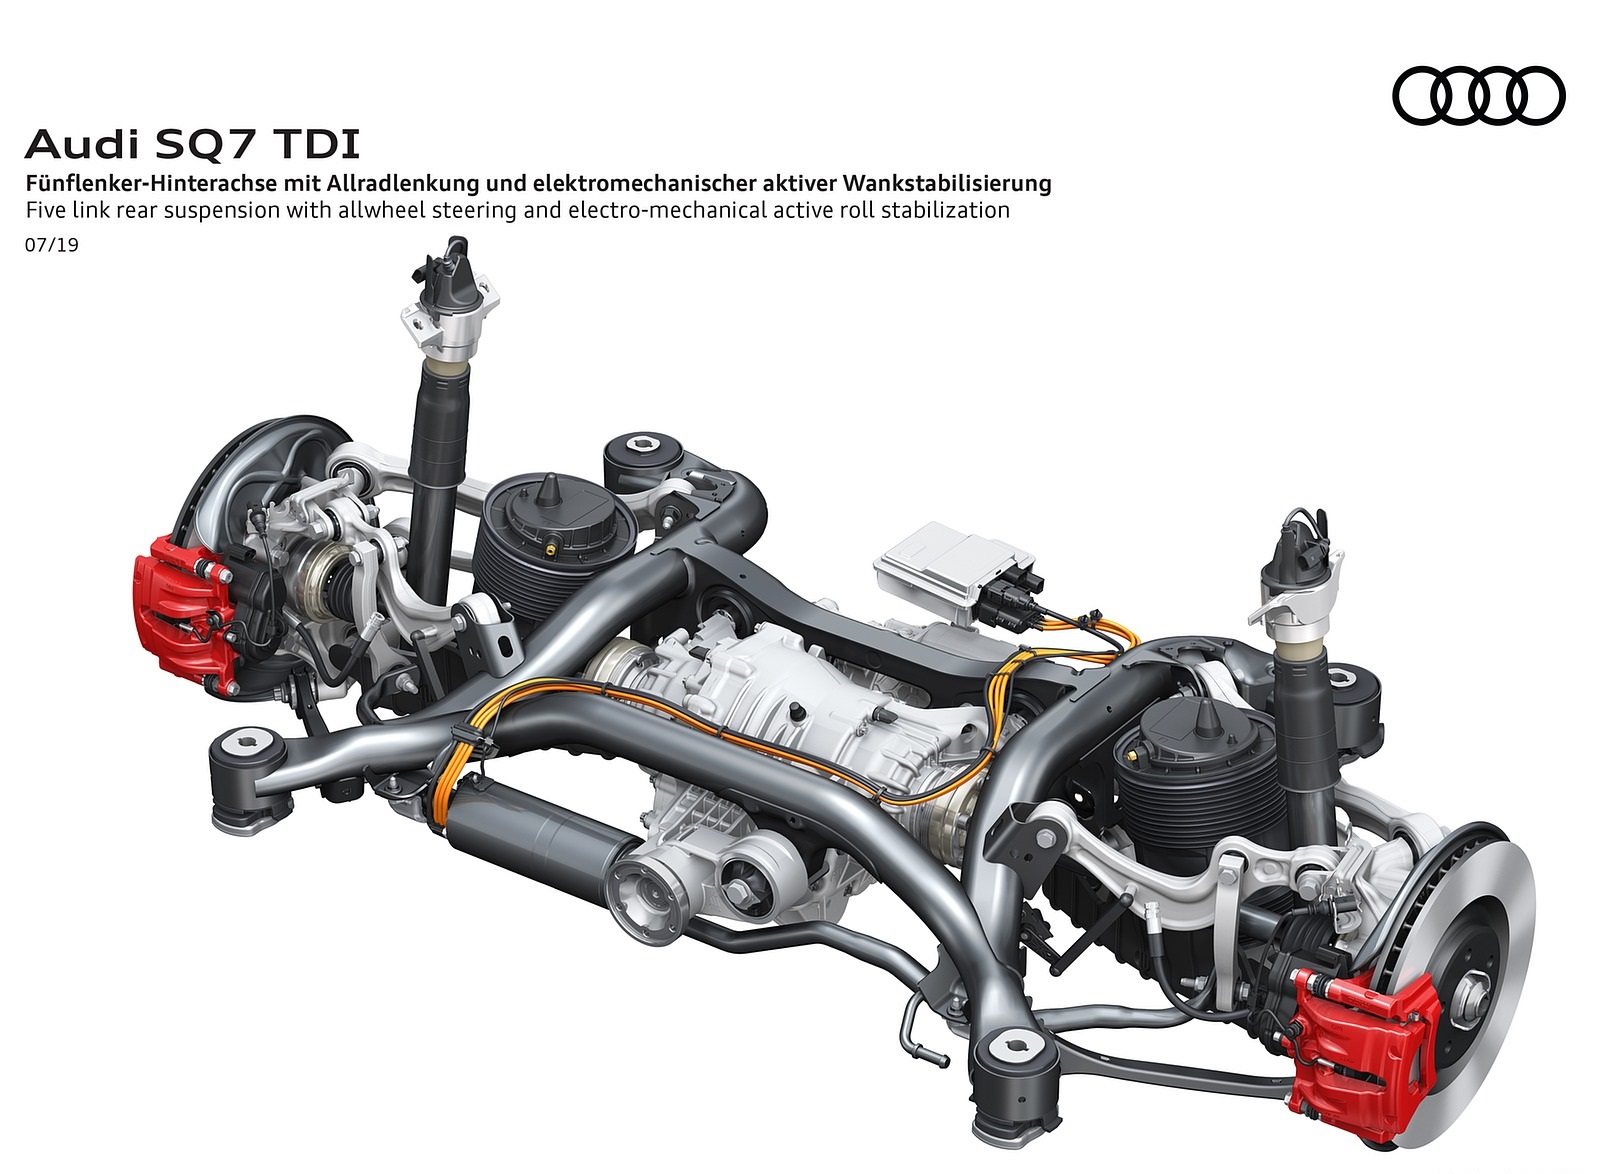 2020 Audi SQ7 TDI Five link rear suspension with allwheel stearing and electro-mechanical aktive roll stabilization Wallpapers #137 of 140